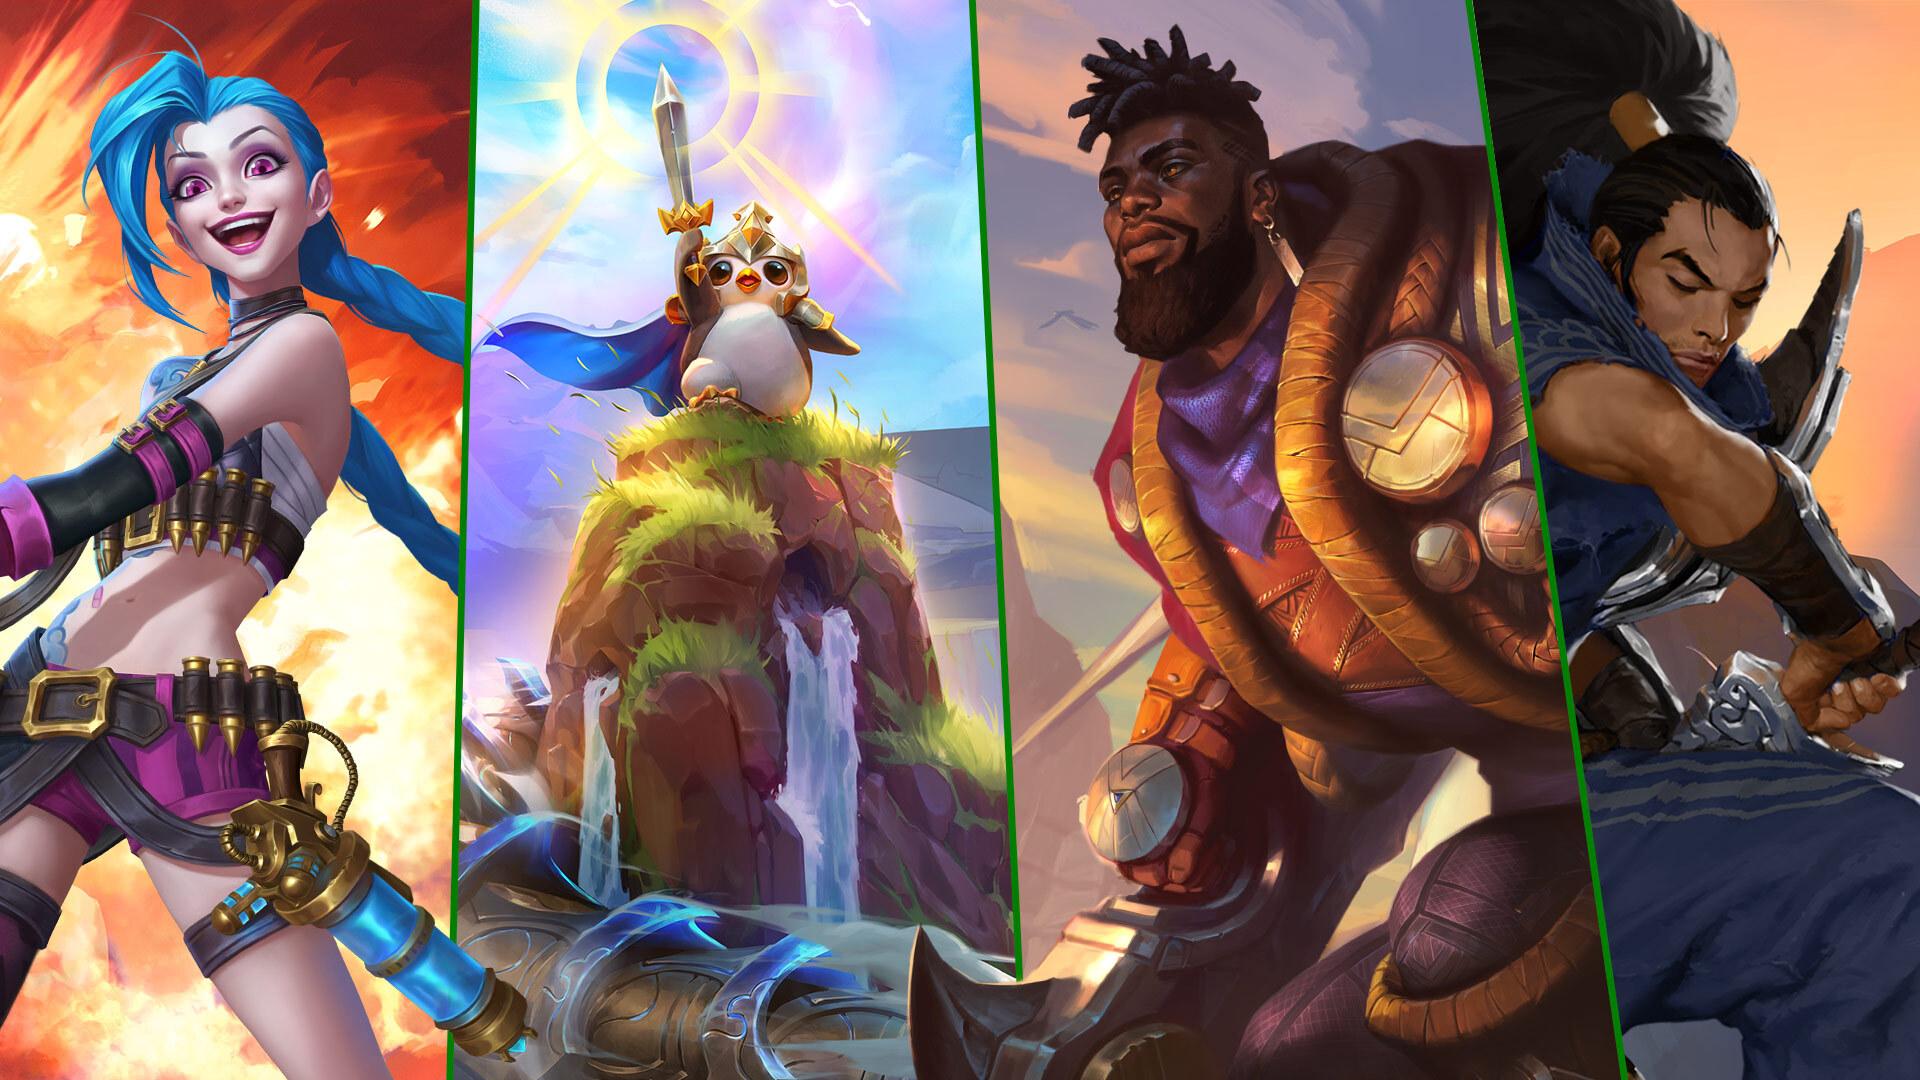 Riot Games (@riotgames) • Instagram photos and videos